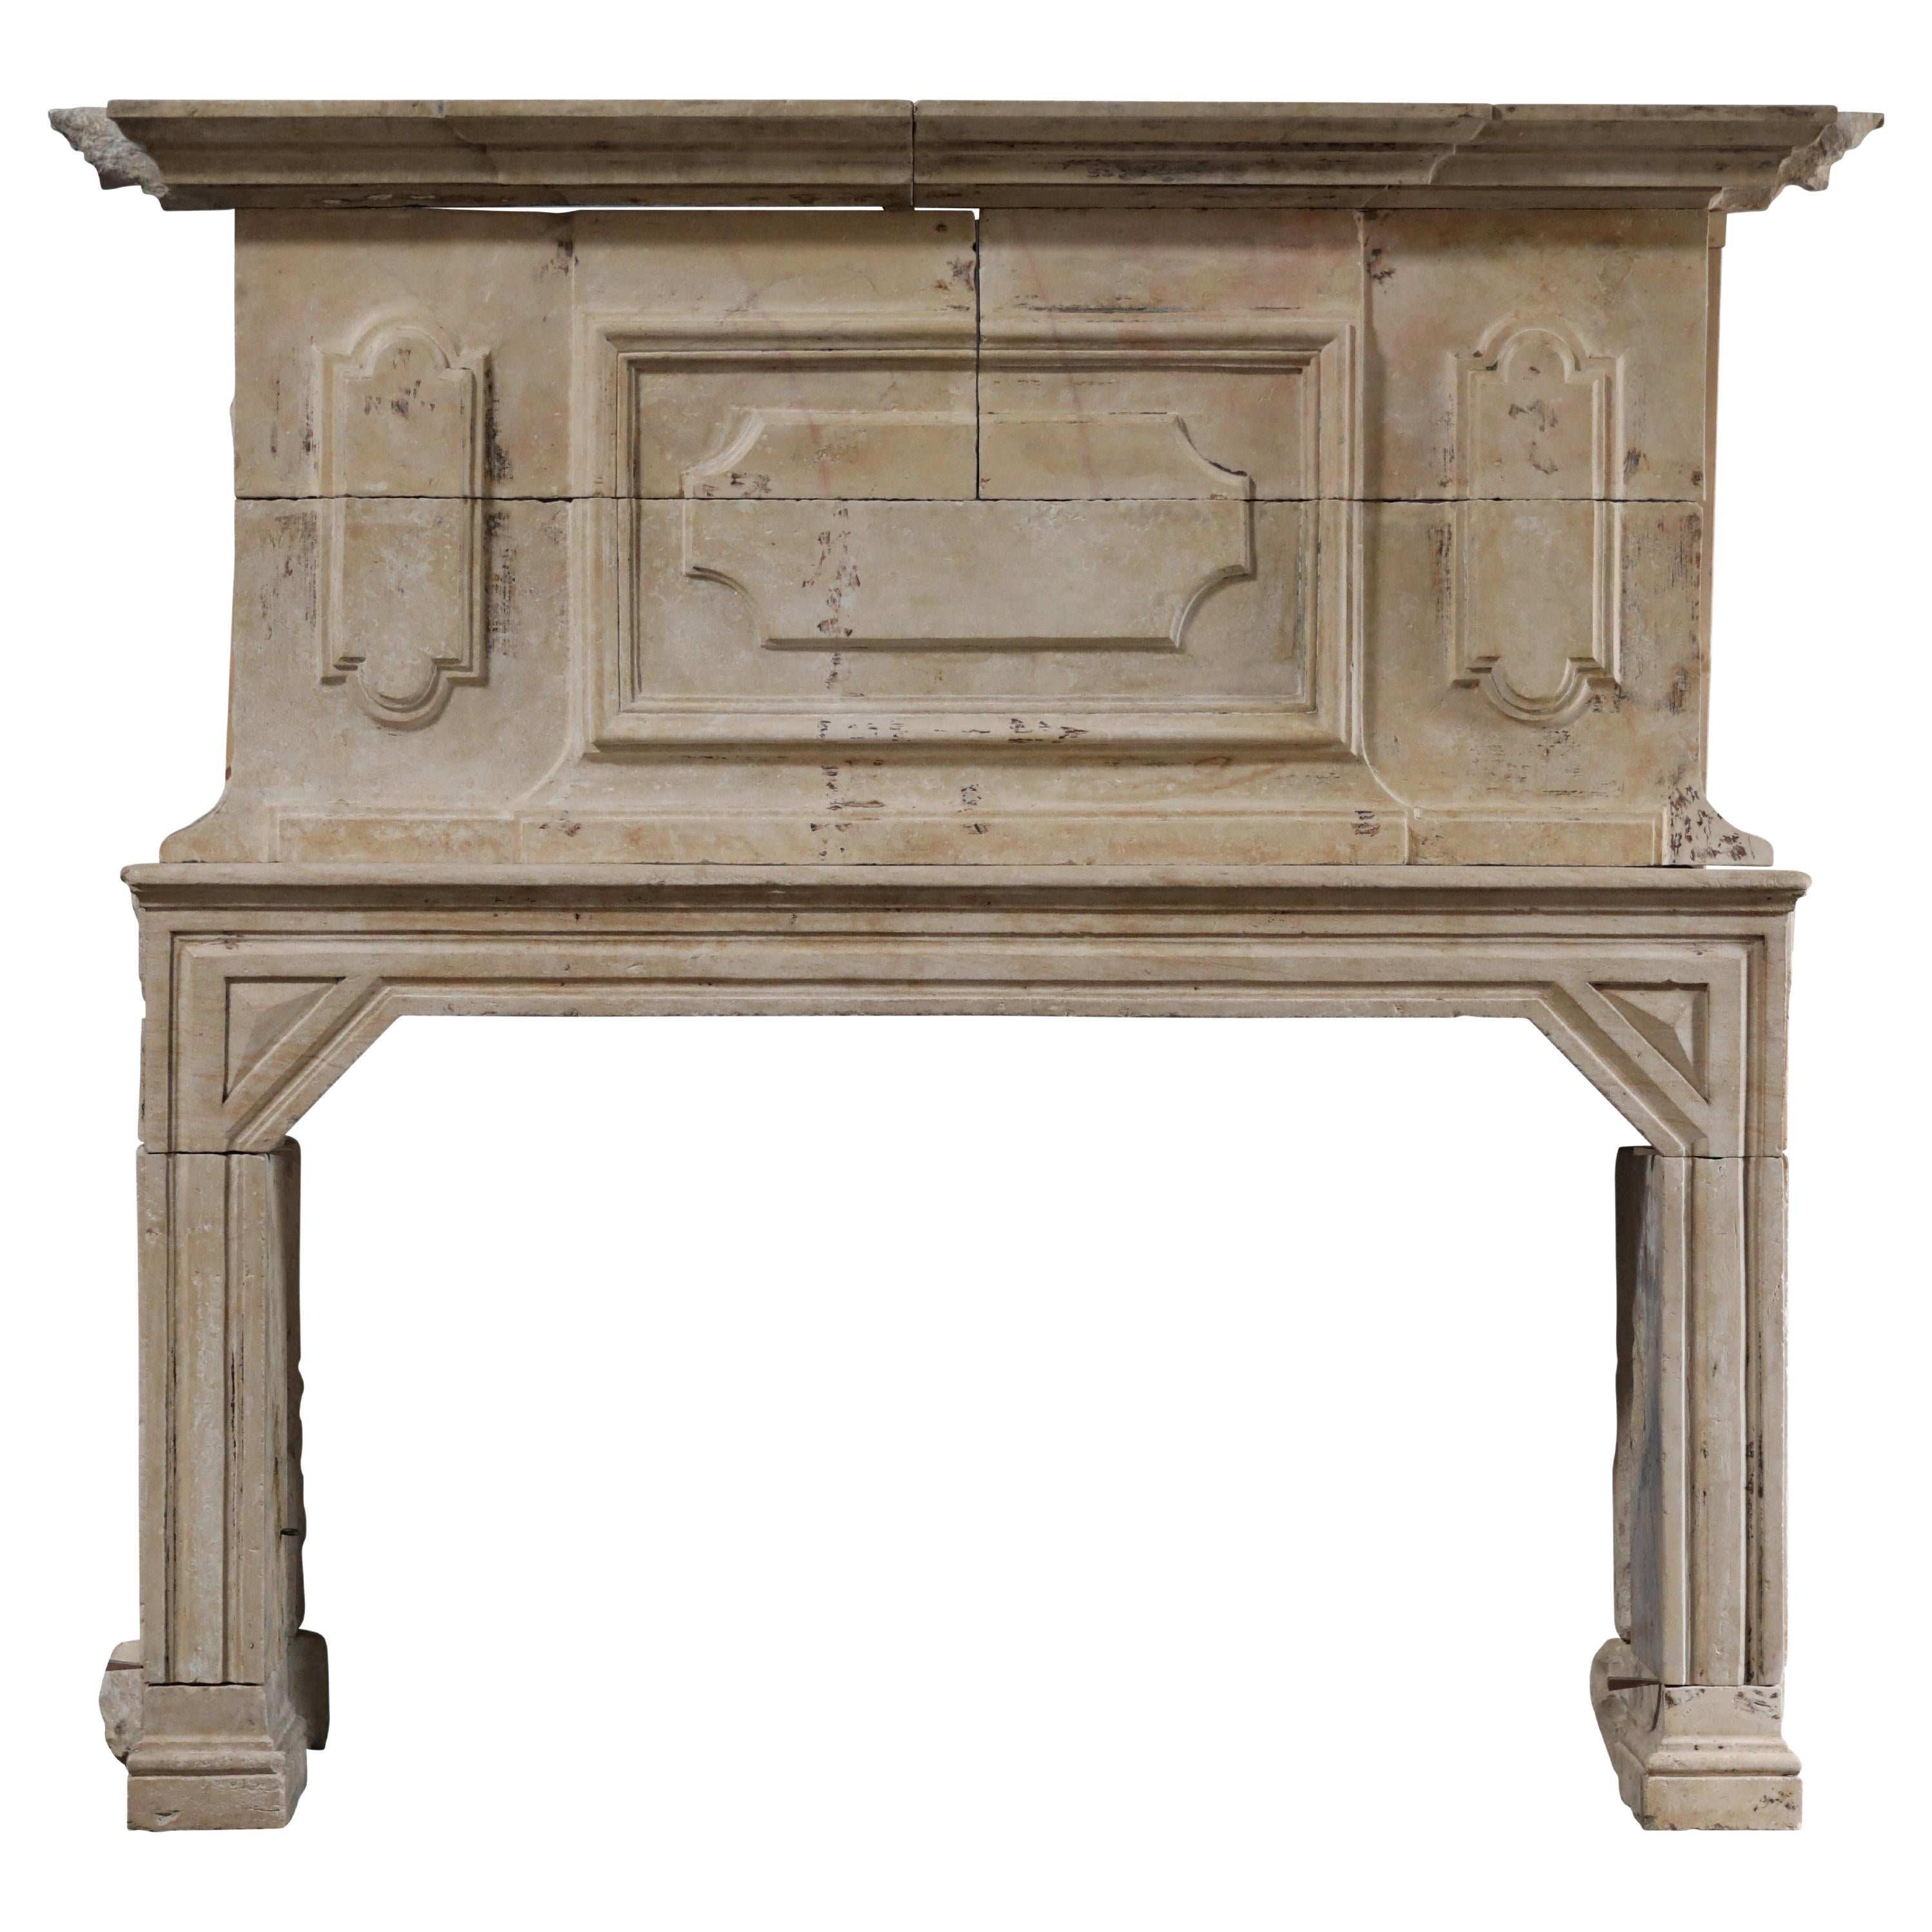 Sensational Timeless Chateau Fireplace Surround For Sale